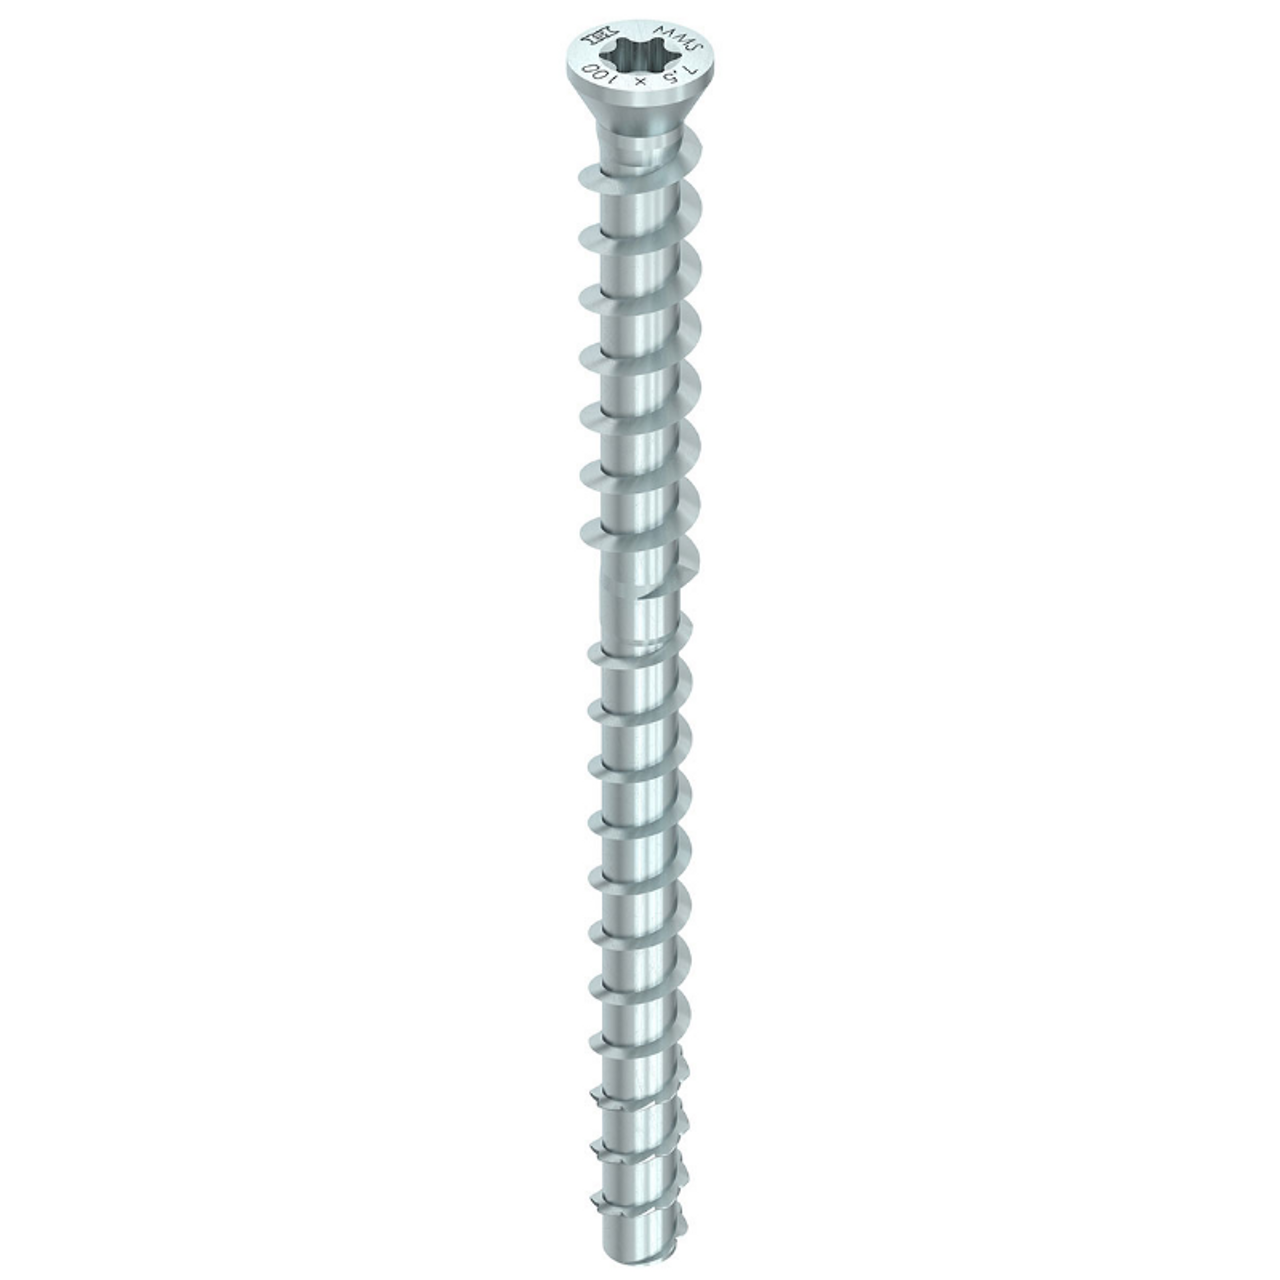 Craftsman Hardware, has a tools store where you can find Timber-Connect Screw Anchor such as HECO 10mm Silver Zinc Timber-Connect Screw Anchor for the Construction Industry in Australia and New Zealand